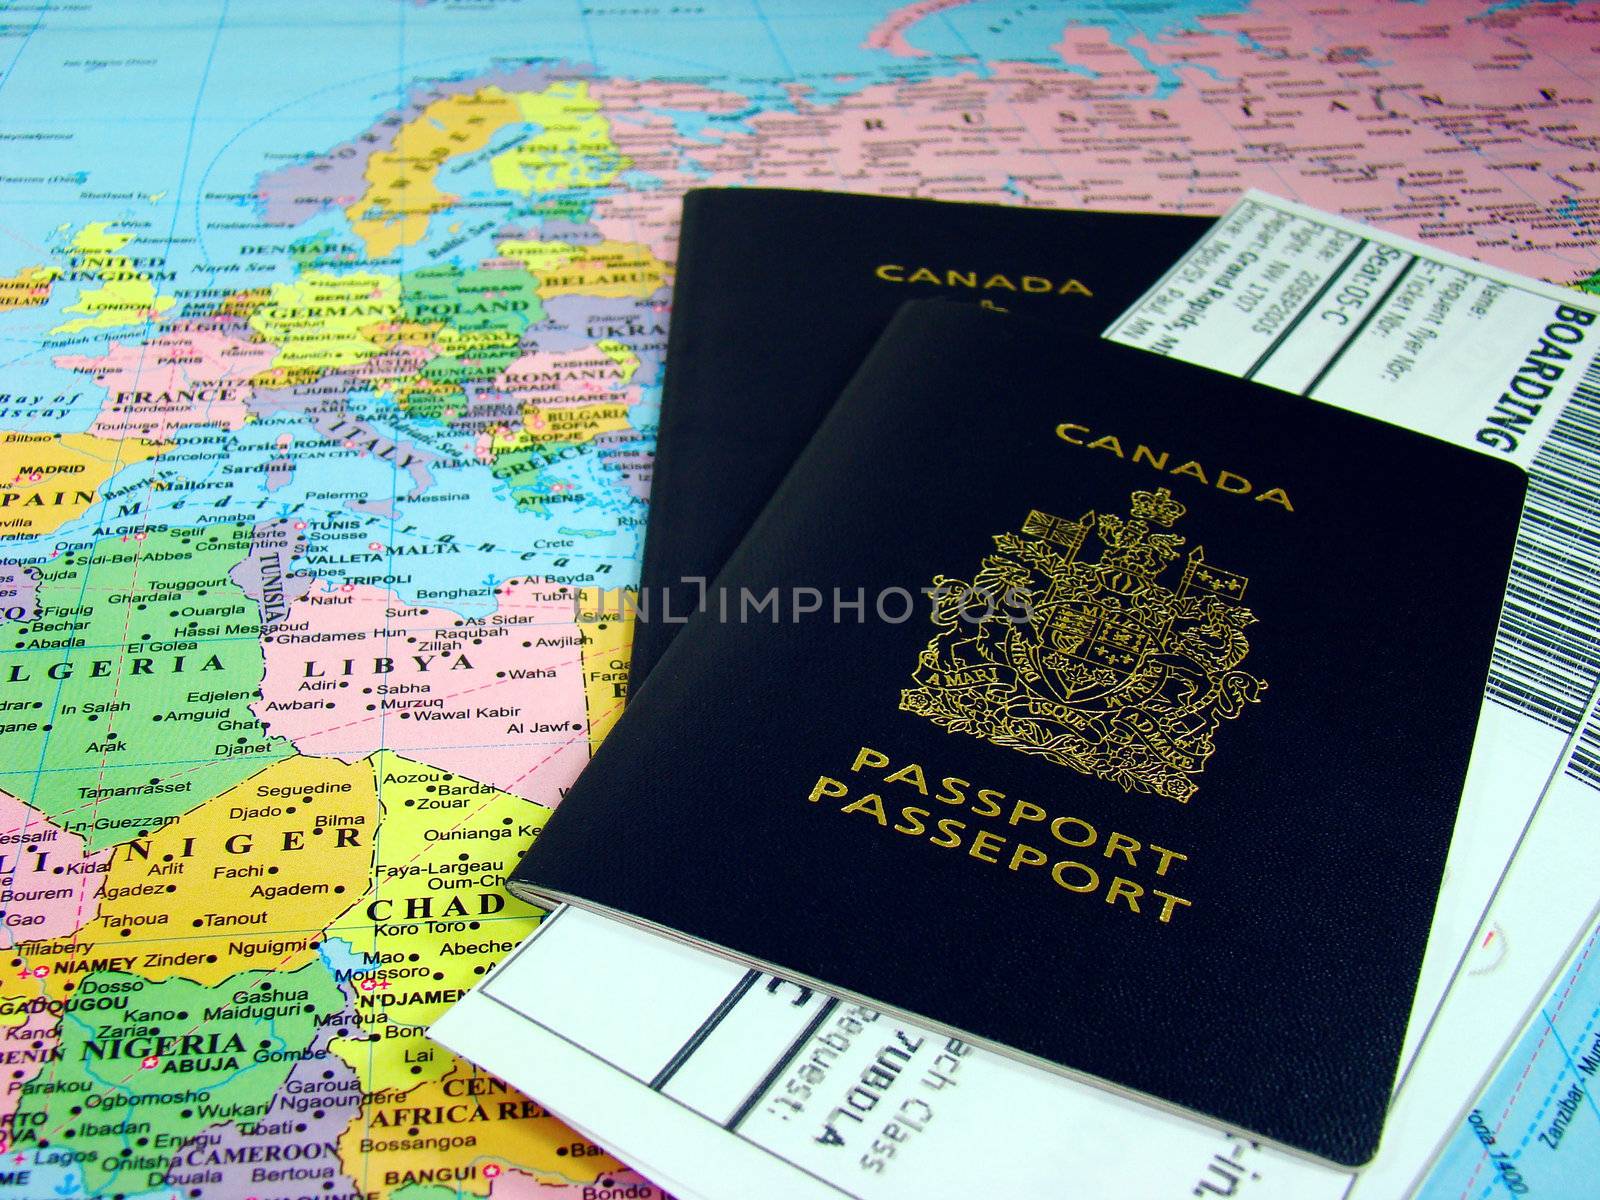 Canadian passports by FER737NG